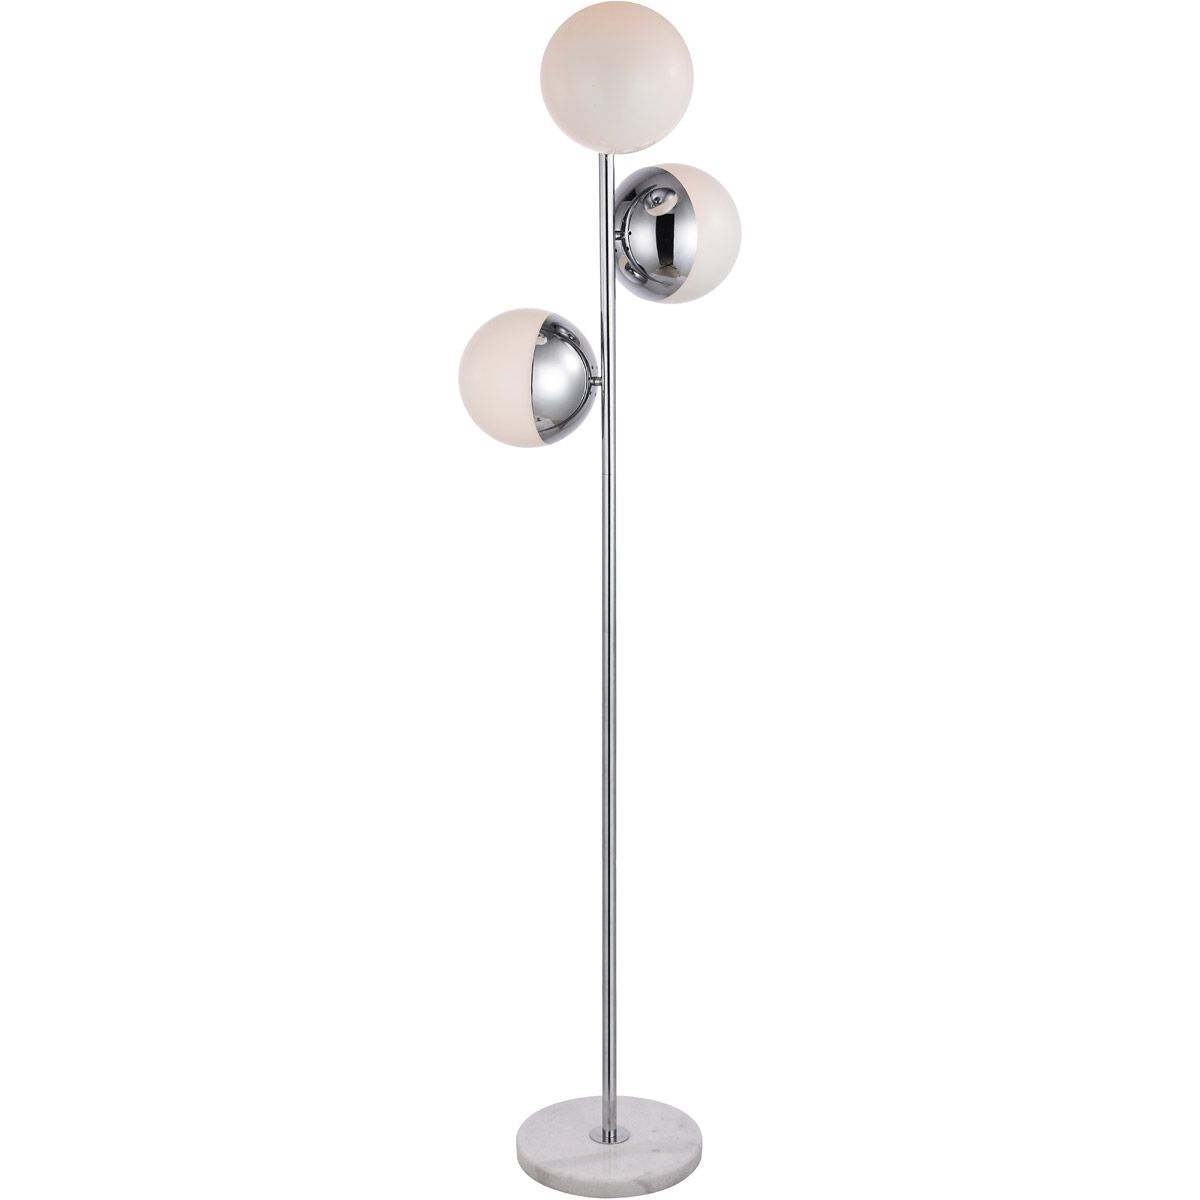 Floor Lamps 3 Light Fixtures With Chrome Finish Metal/glass/marble Material  E26 Bulb 18" 120 Watts – Walmart For Chrome Finish Metal Floor Lamps (View 15 of 15)